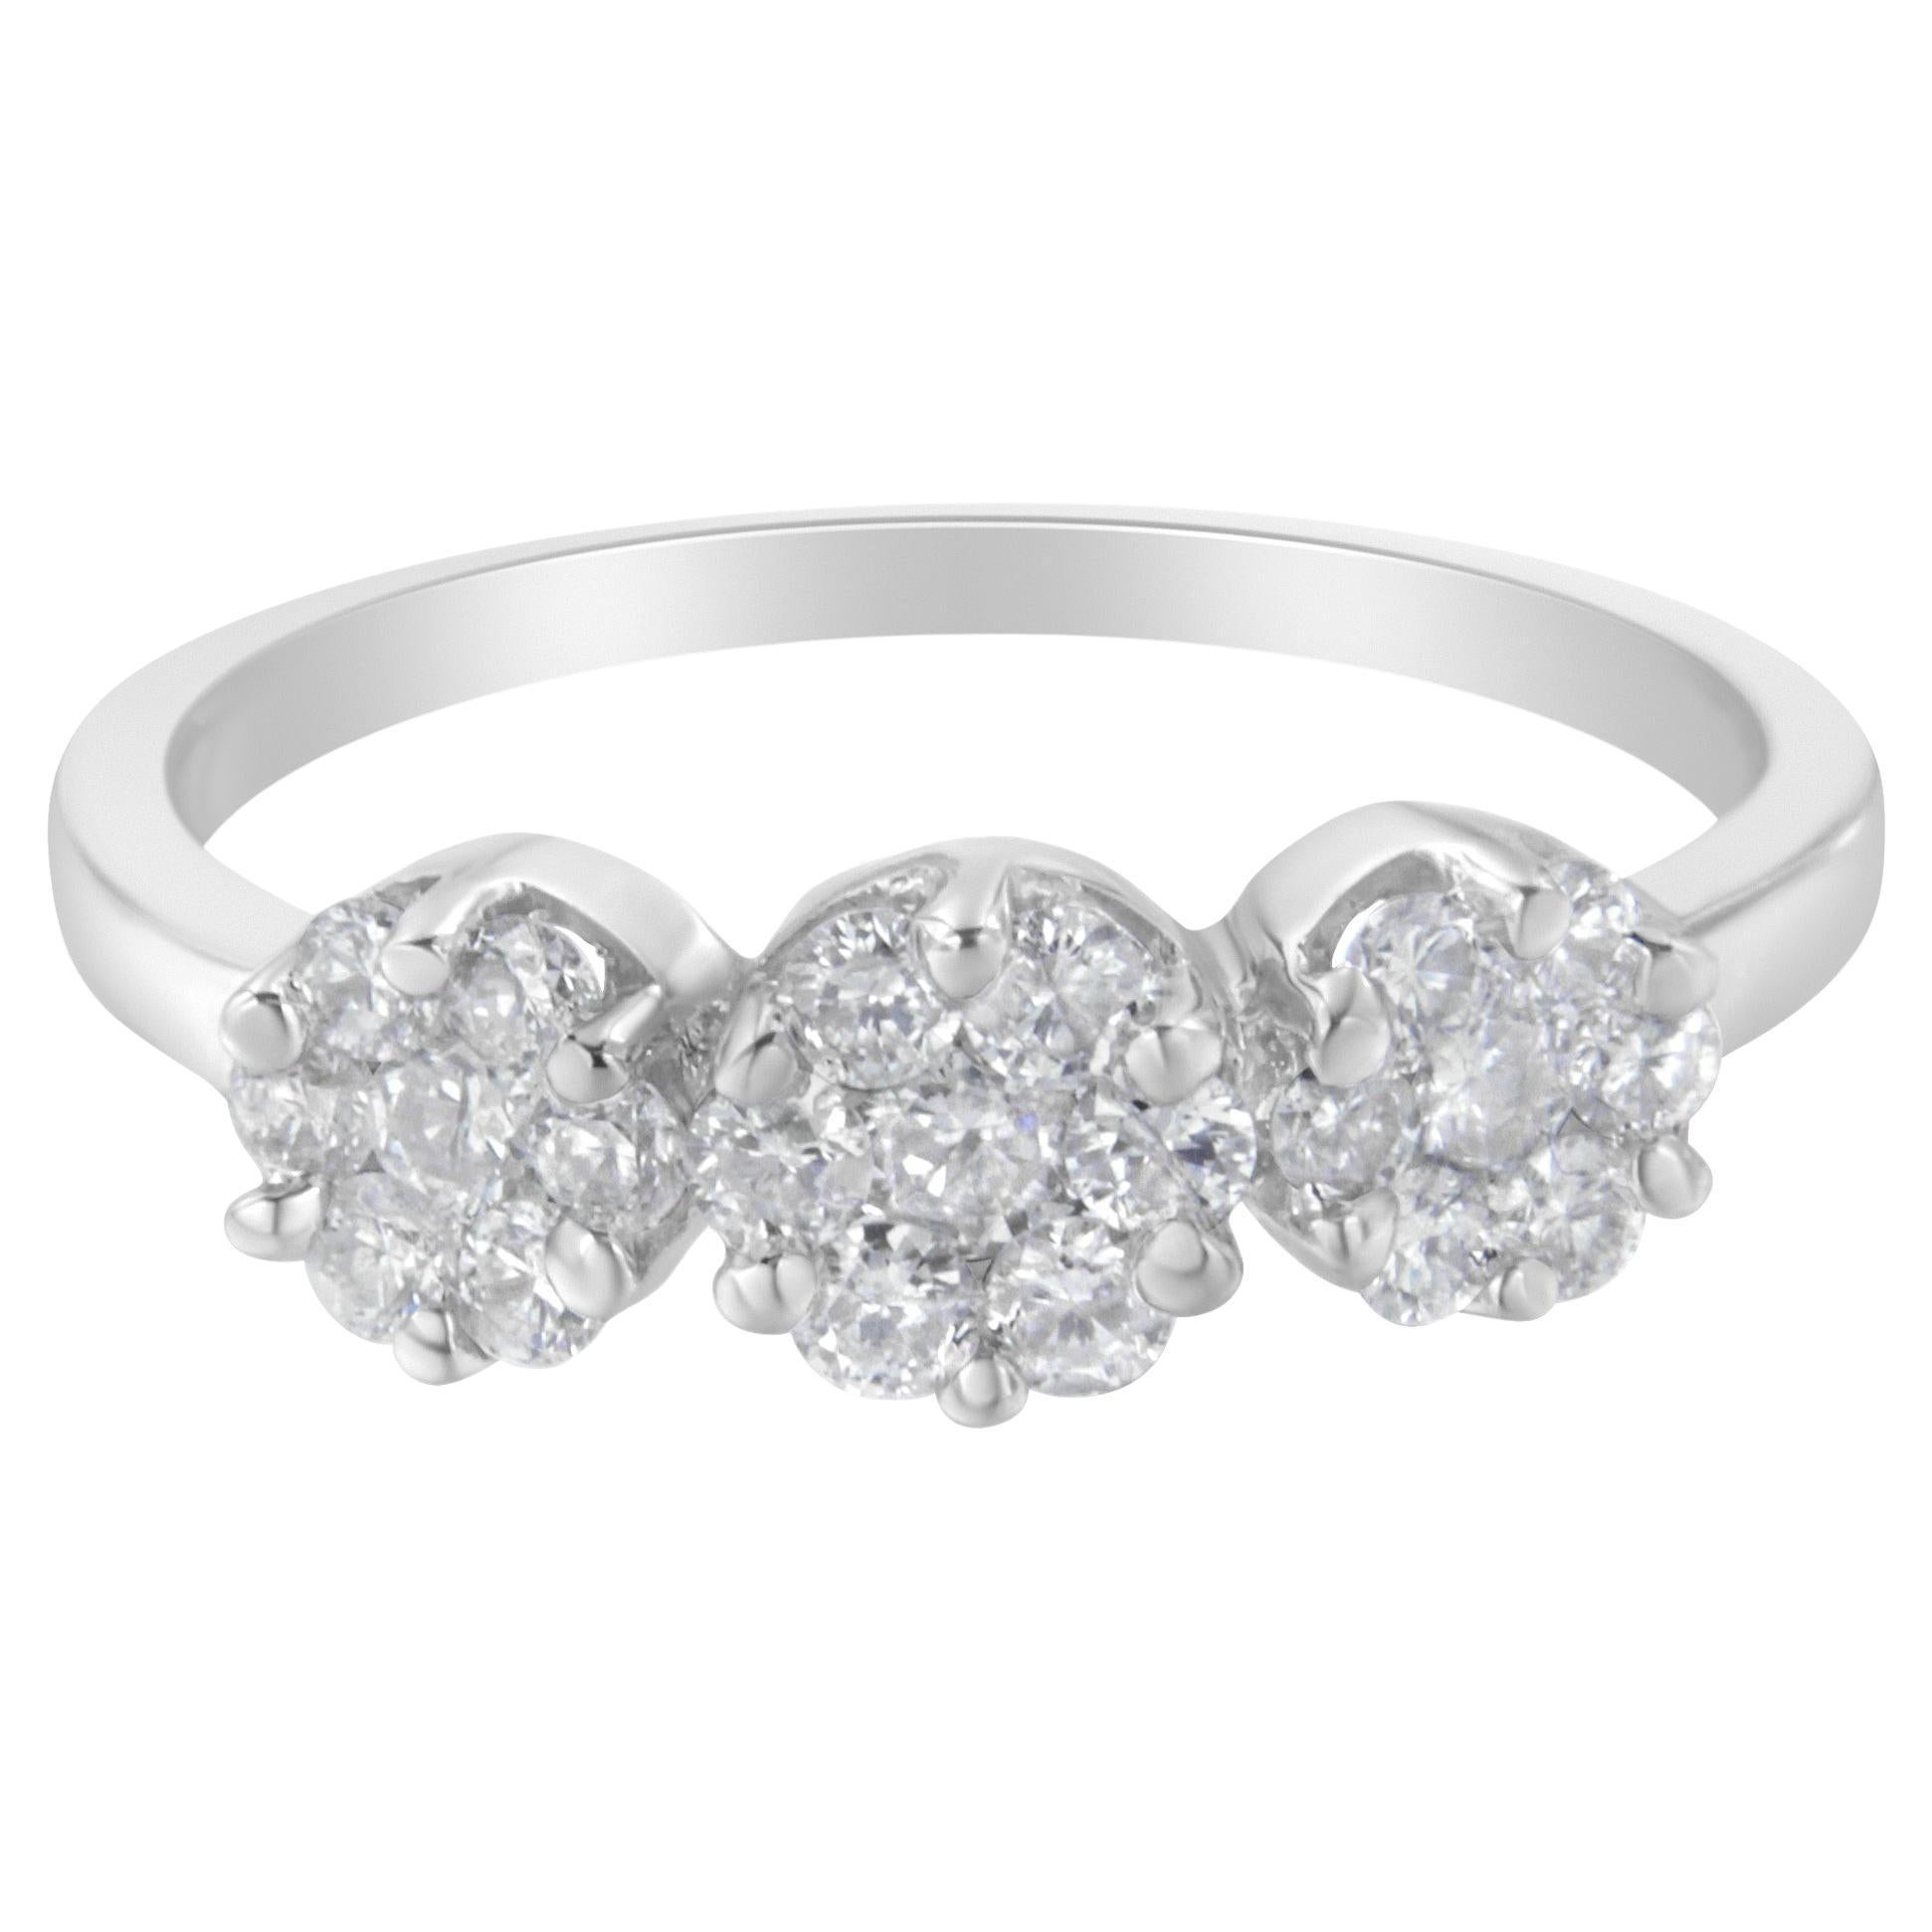 14k White Gold ¾ Carat Floral Cluster Diamond 3 Stone Style Cocktail Ring